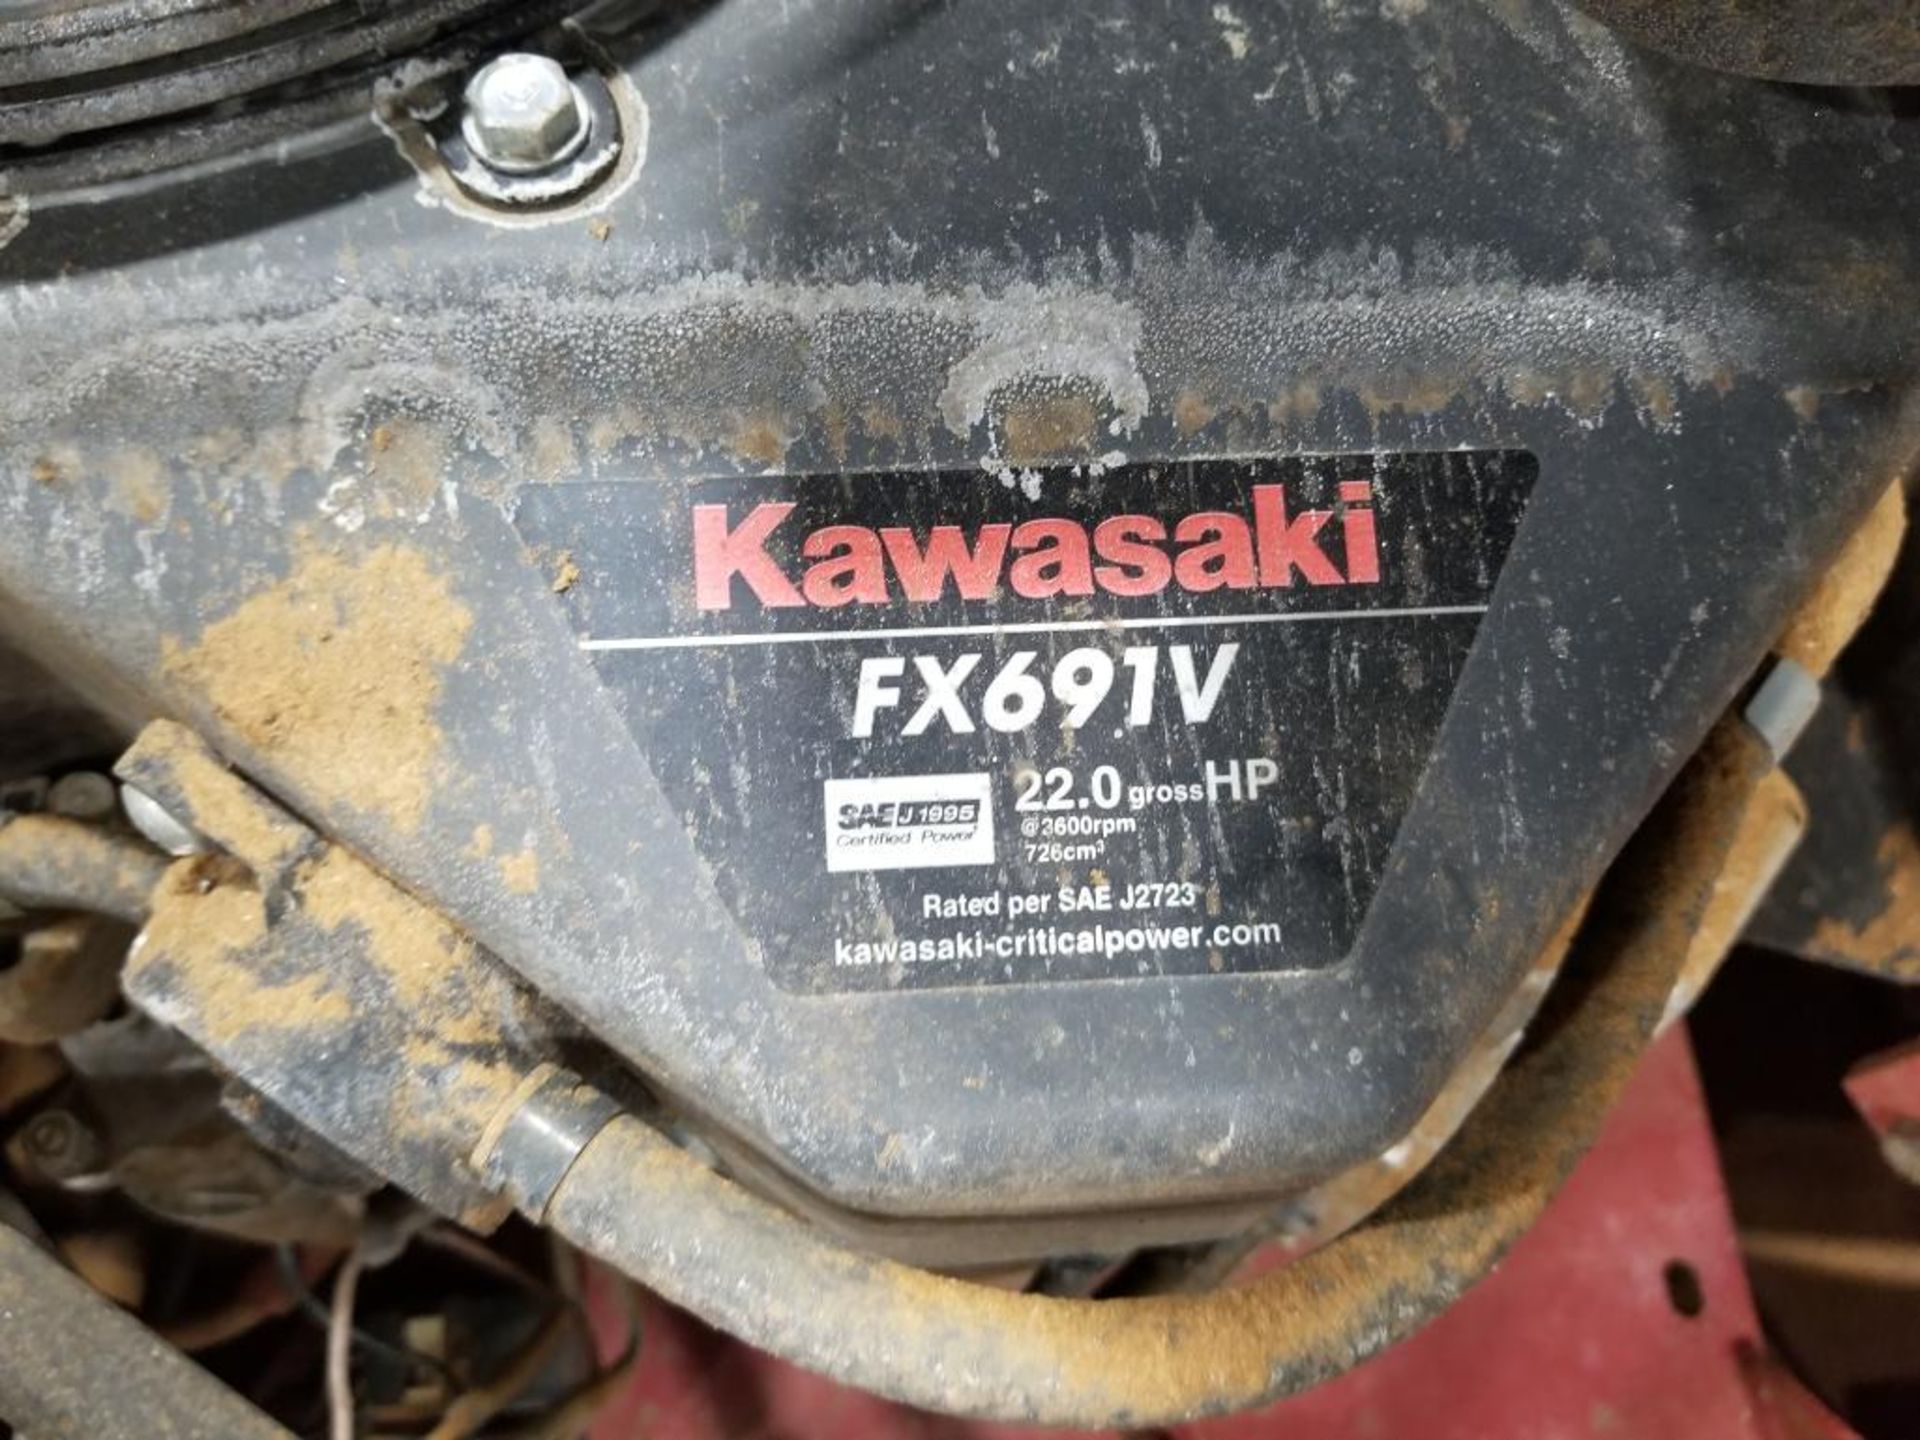 60in Exmark walk behind mower. Kawasaki 22hp engine. Working condition unknown. Battery is dead. - Image 3 of 20